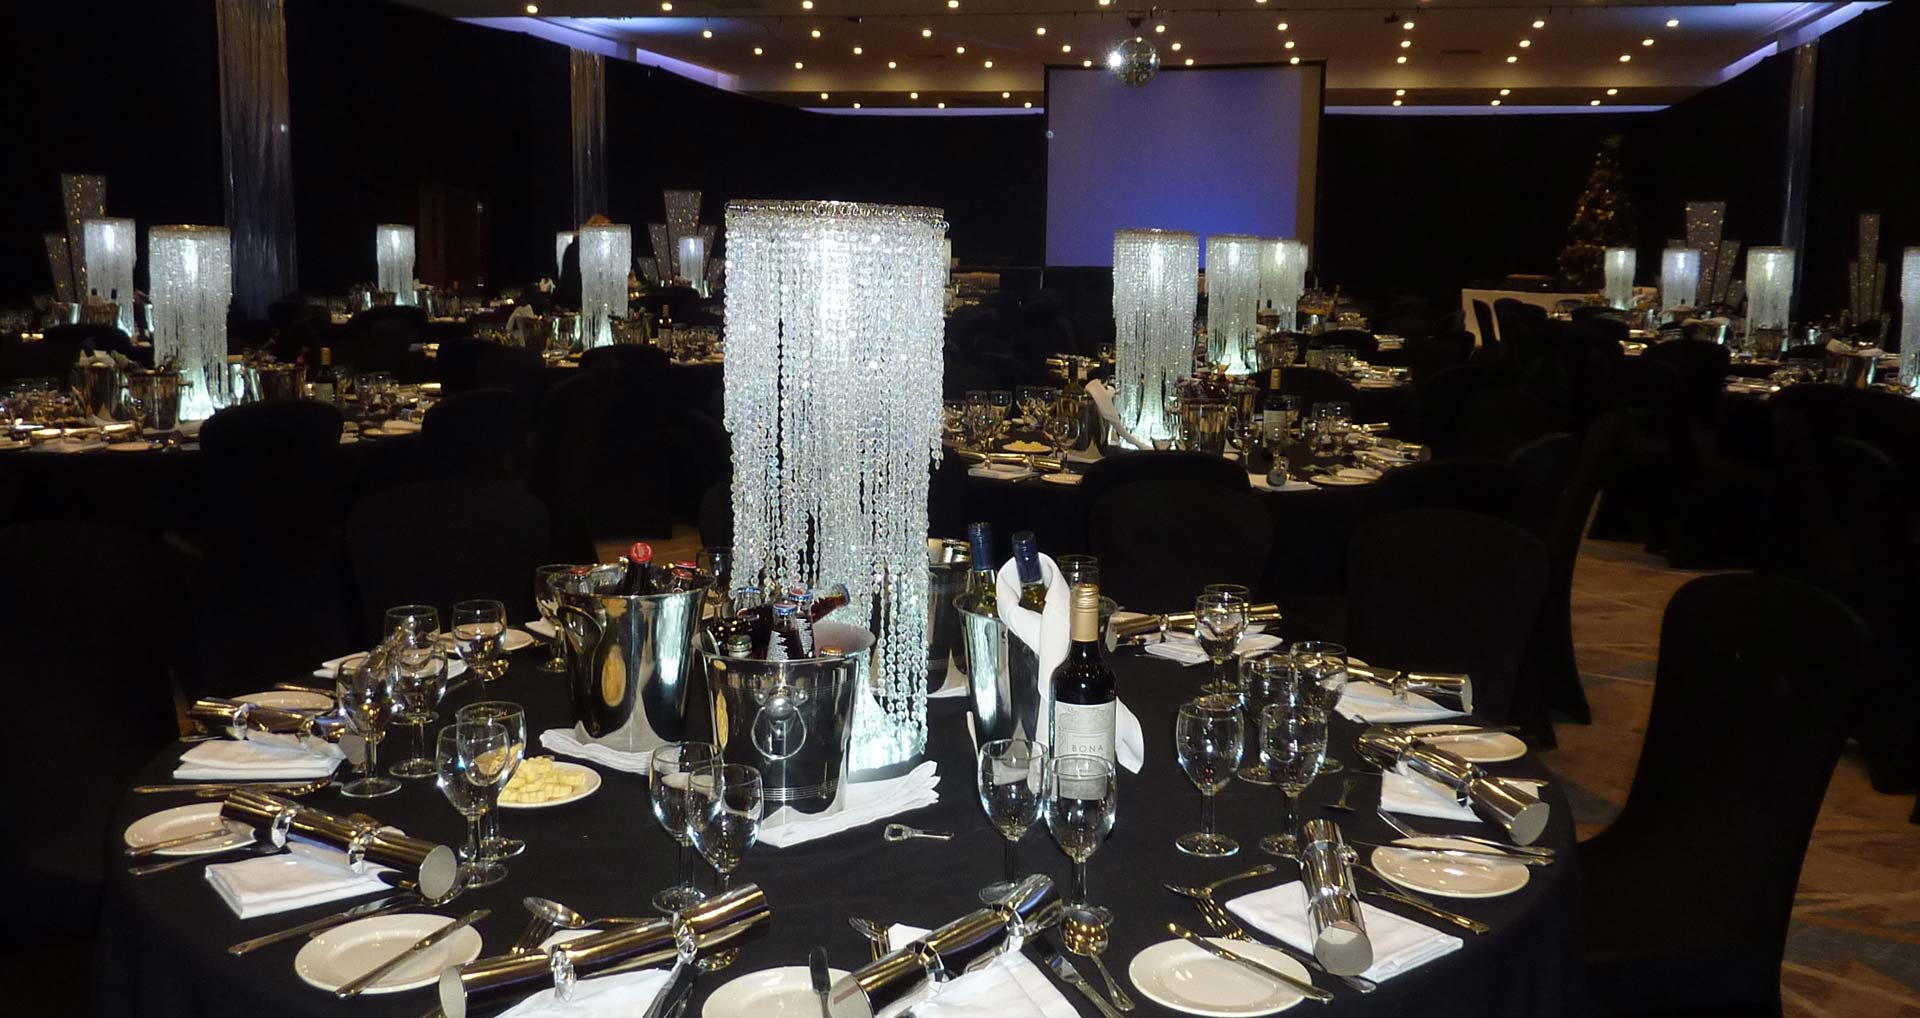 LED lighting included with most centrepieces